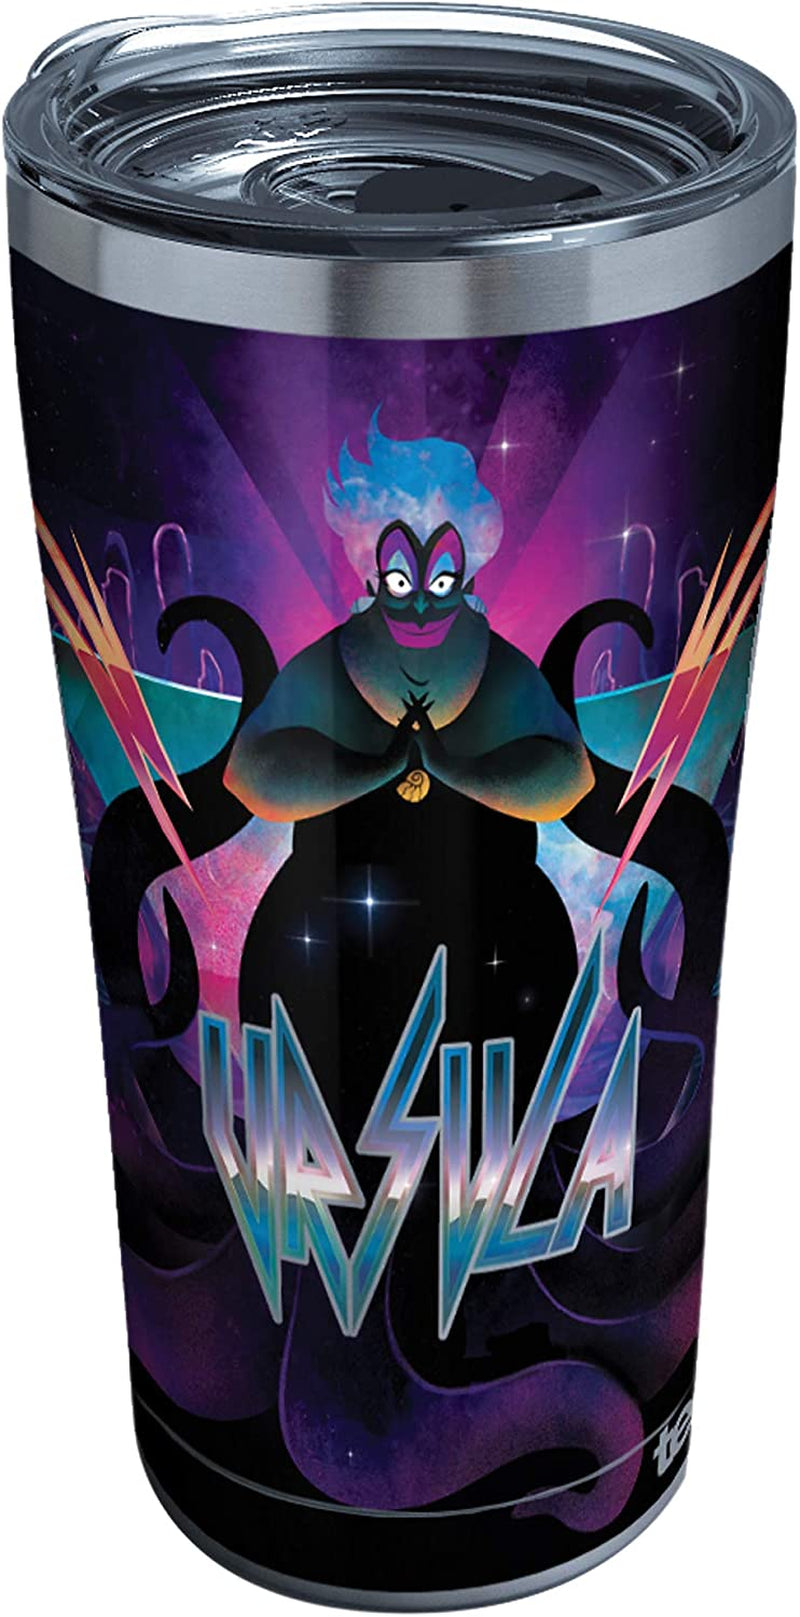 Tervis Triple Walled Disney Villains Insulated Tumbler Cup Keeps Drinks Cold & Hot, 20Oz, Maleficent Home & Garden > Kitchen & Dining > Tableware > Drinkware Tervis Ursula 20oz 